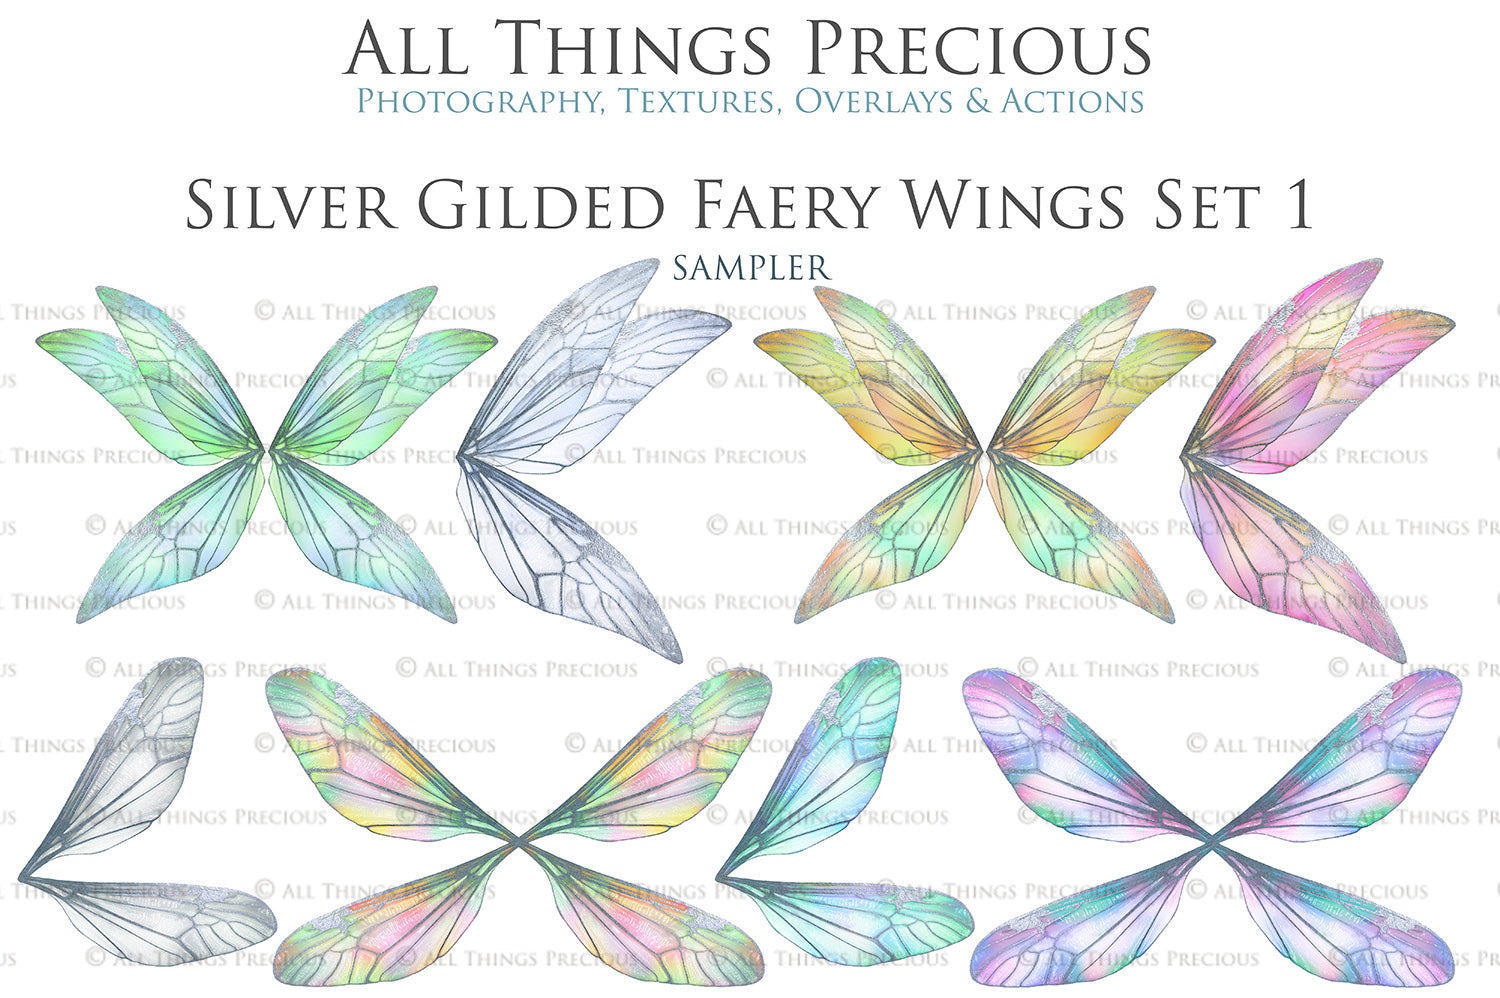 Colour Sparkling fairy wings, Png overlays for photoshop. High resolution transparent, see through wings. Fairycore, Cosplay, Photographers, Photoshop Edits, Digital overlay for photography. Digital stock and resources. Graphic design. Colourful, Gold, Fantasy Wing Bundle. Assets for Fine Art design. By ATP Textures